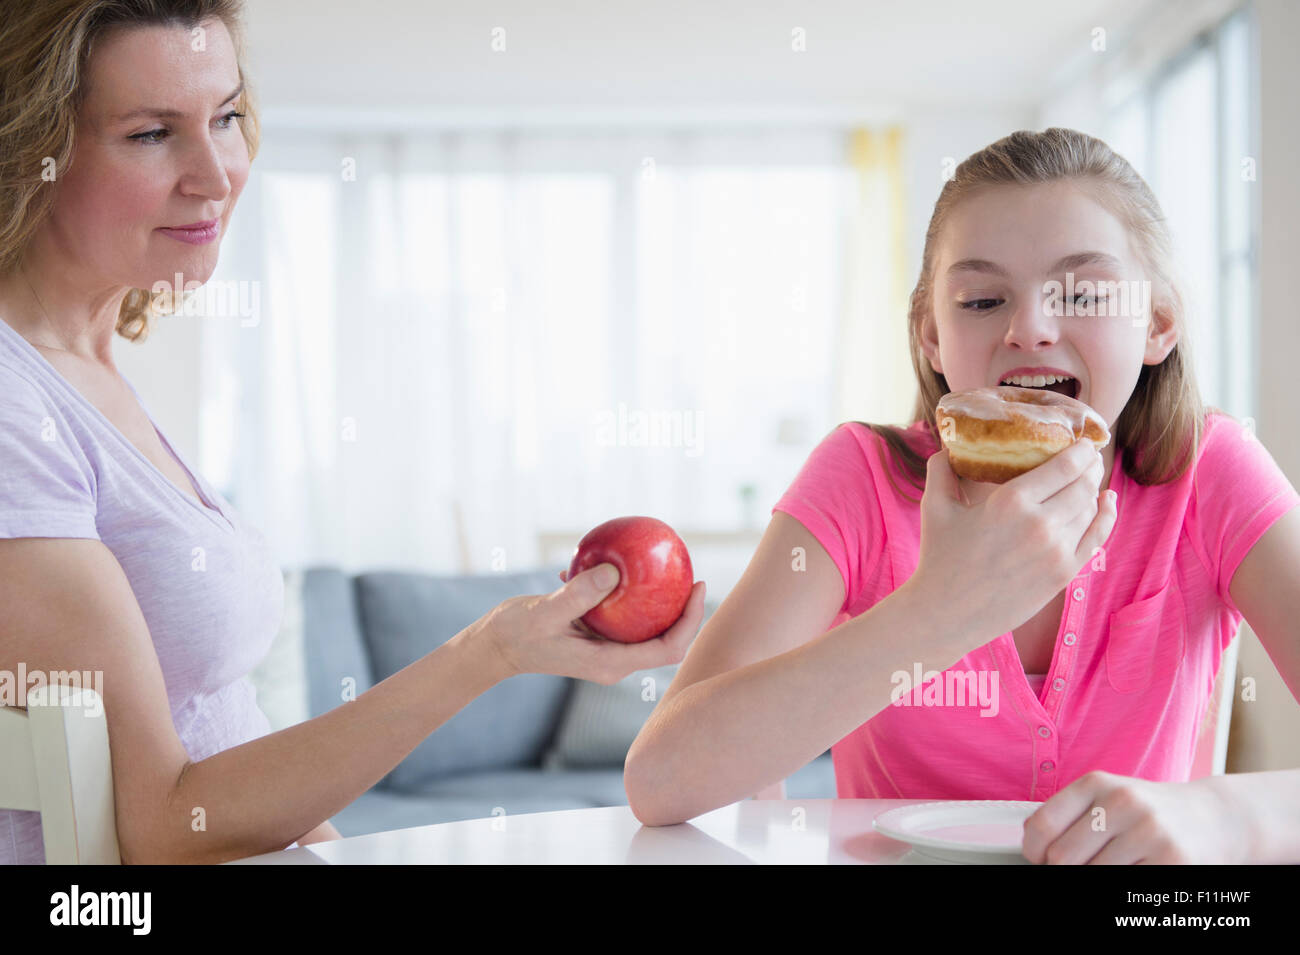 Caucasian mother offering daughter healthy food Stock Photo